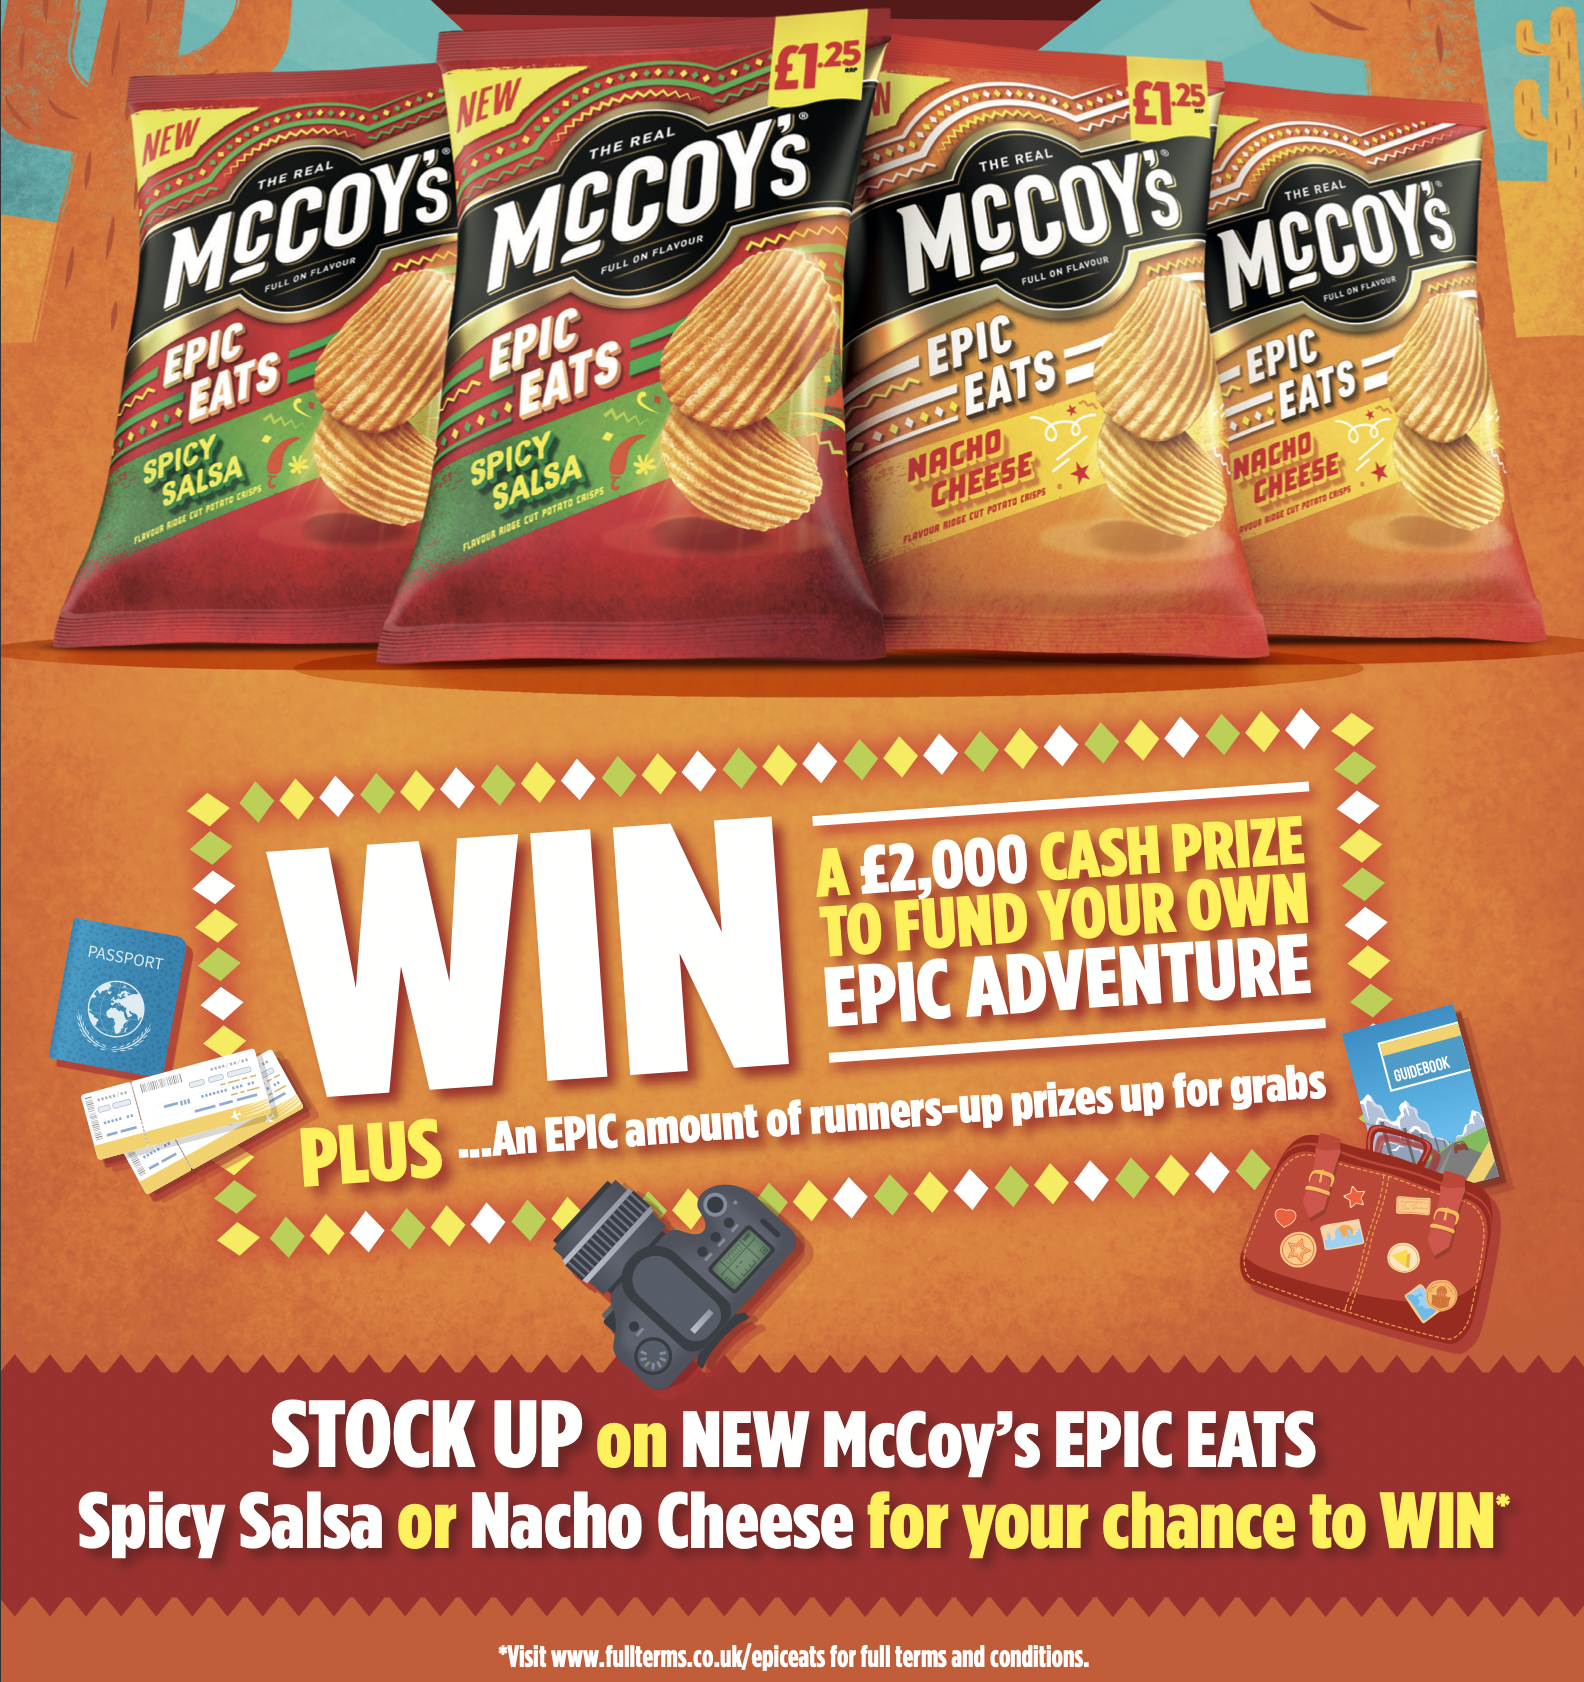 ‘Epic’ retailer competition launched by KP Snacks